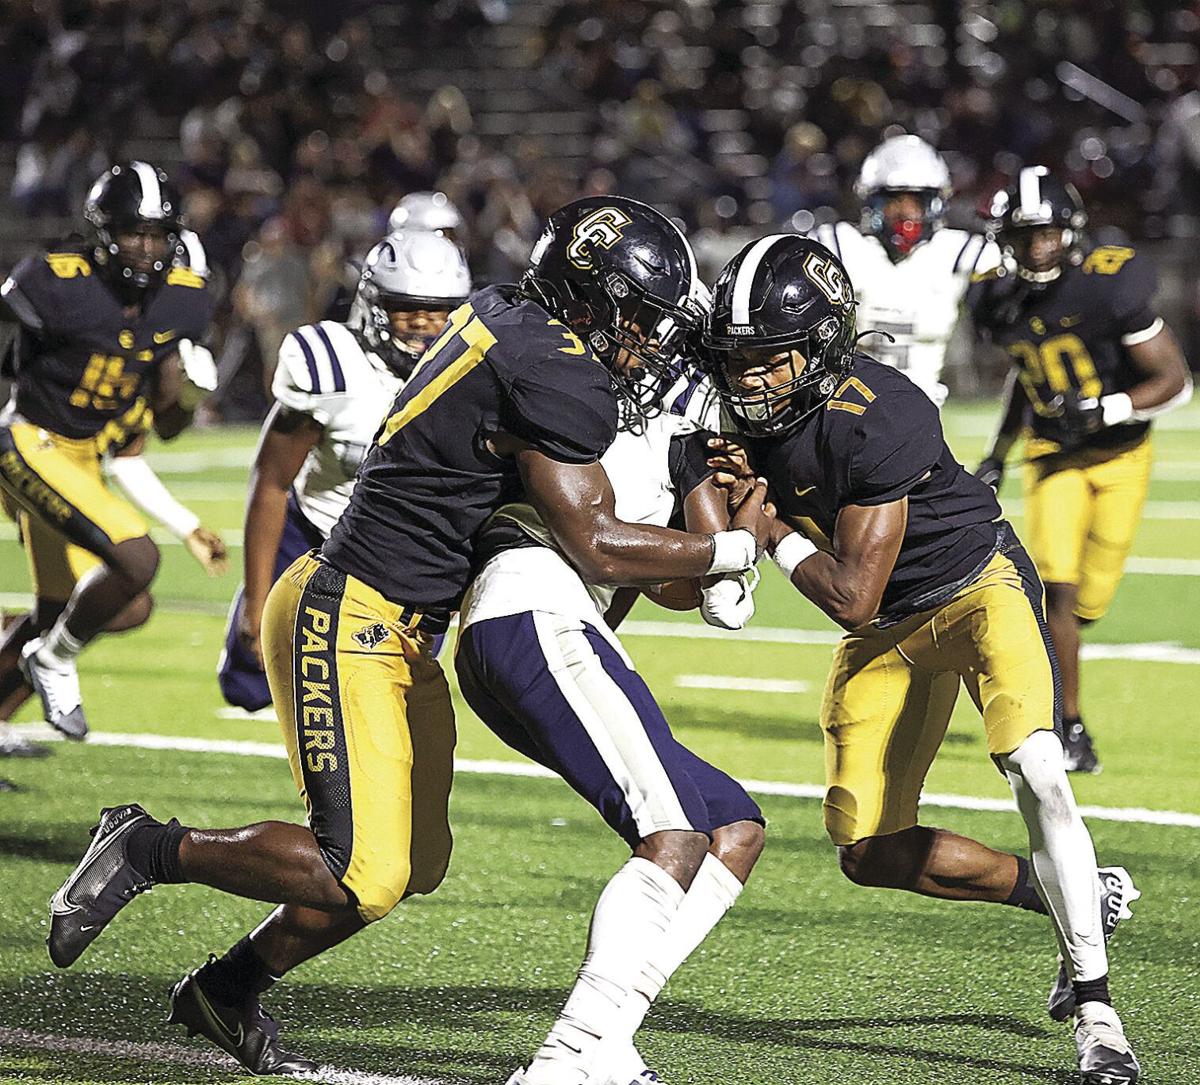 Pack gears up for meeting with unbeaten Lee County | Local Sports |  